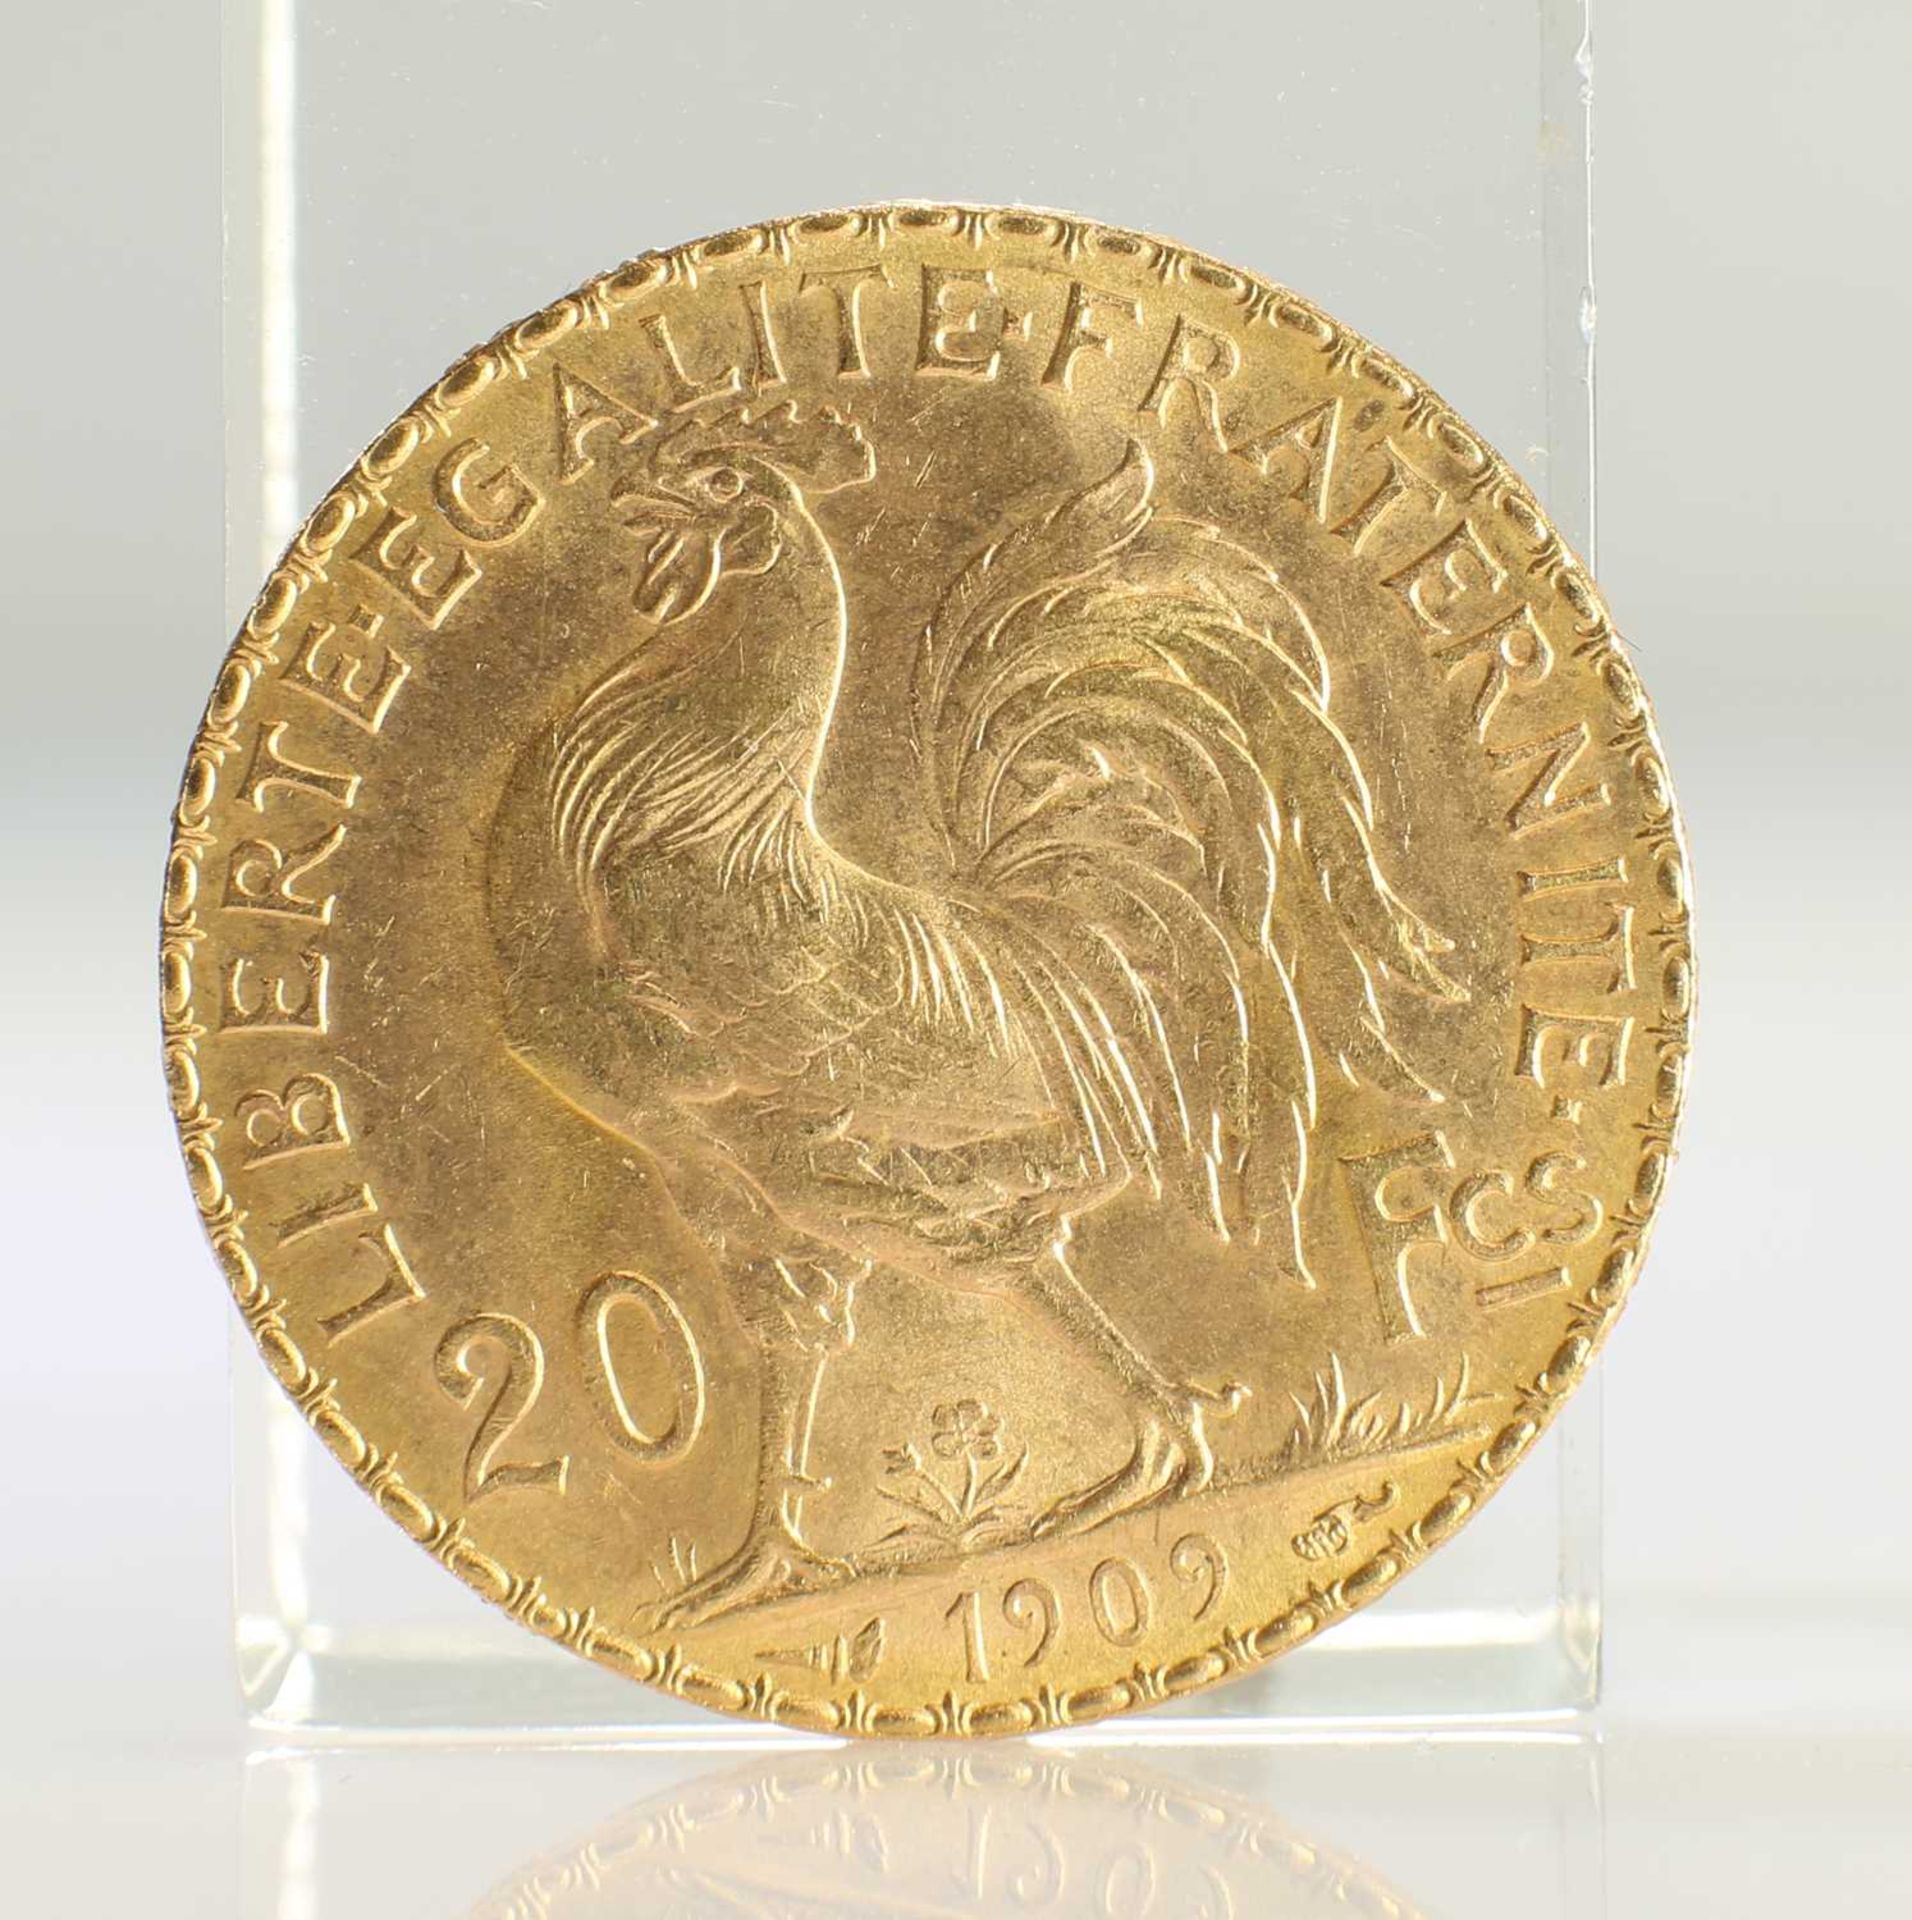 1909 FRENCH GOLD COIN, 20 FRANCS - MARIANNE ROOSTER